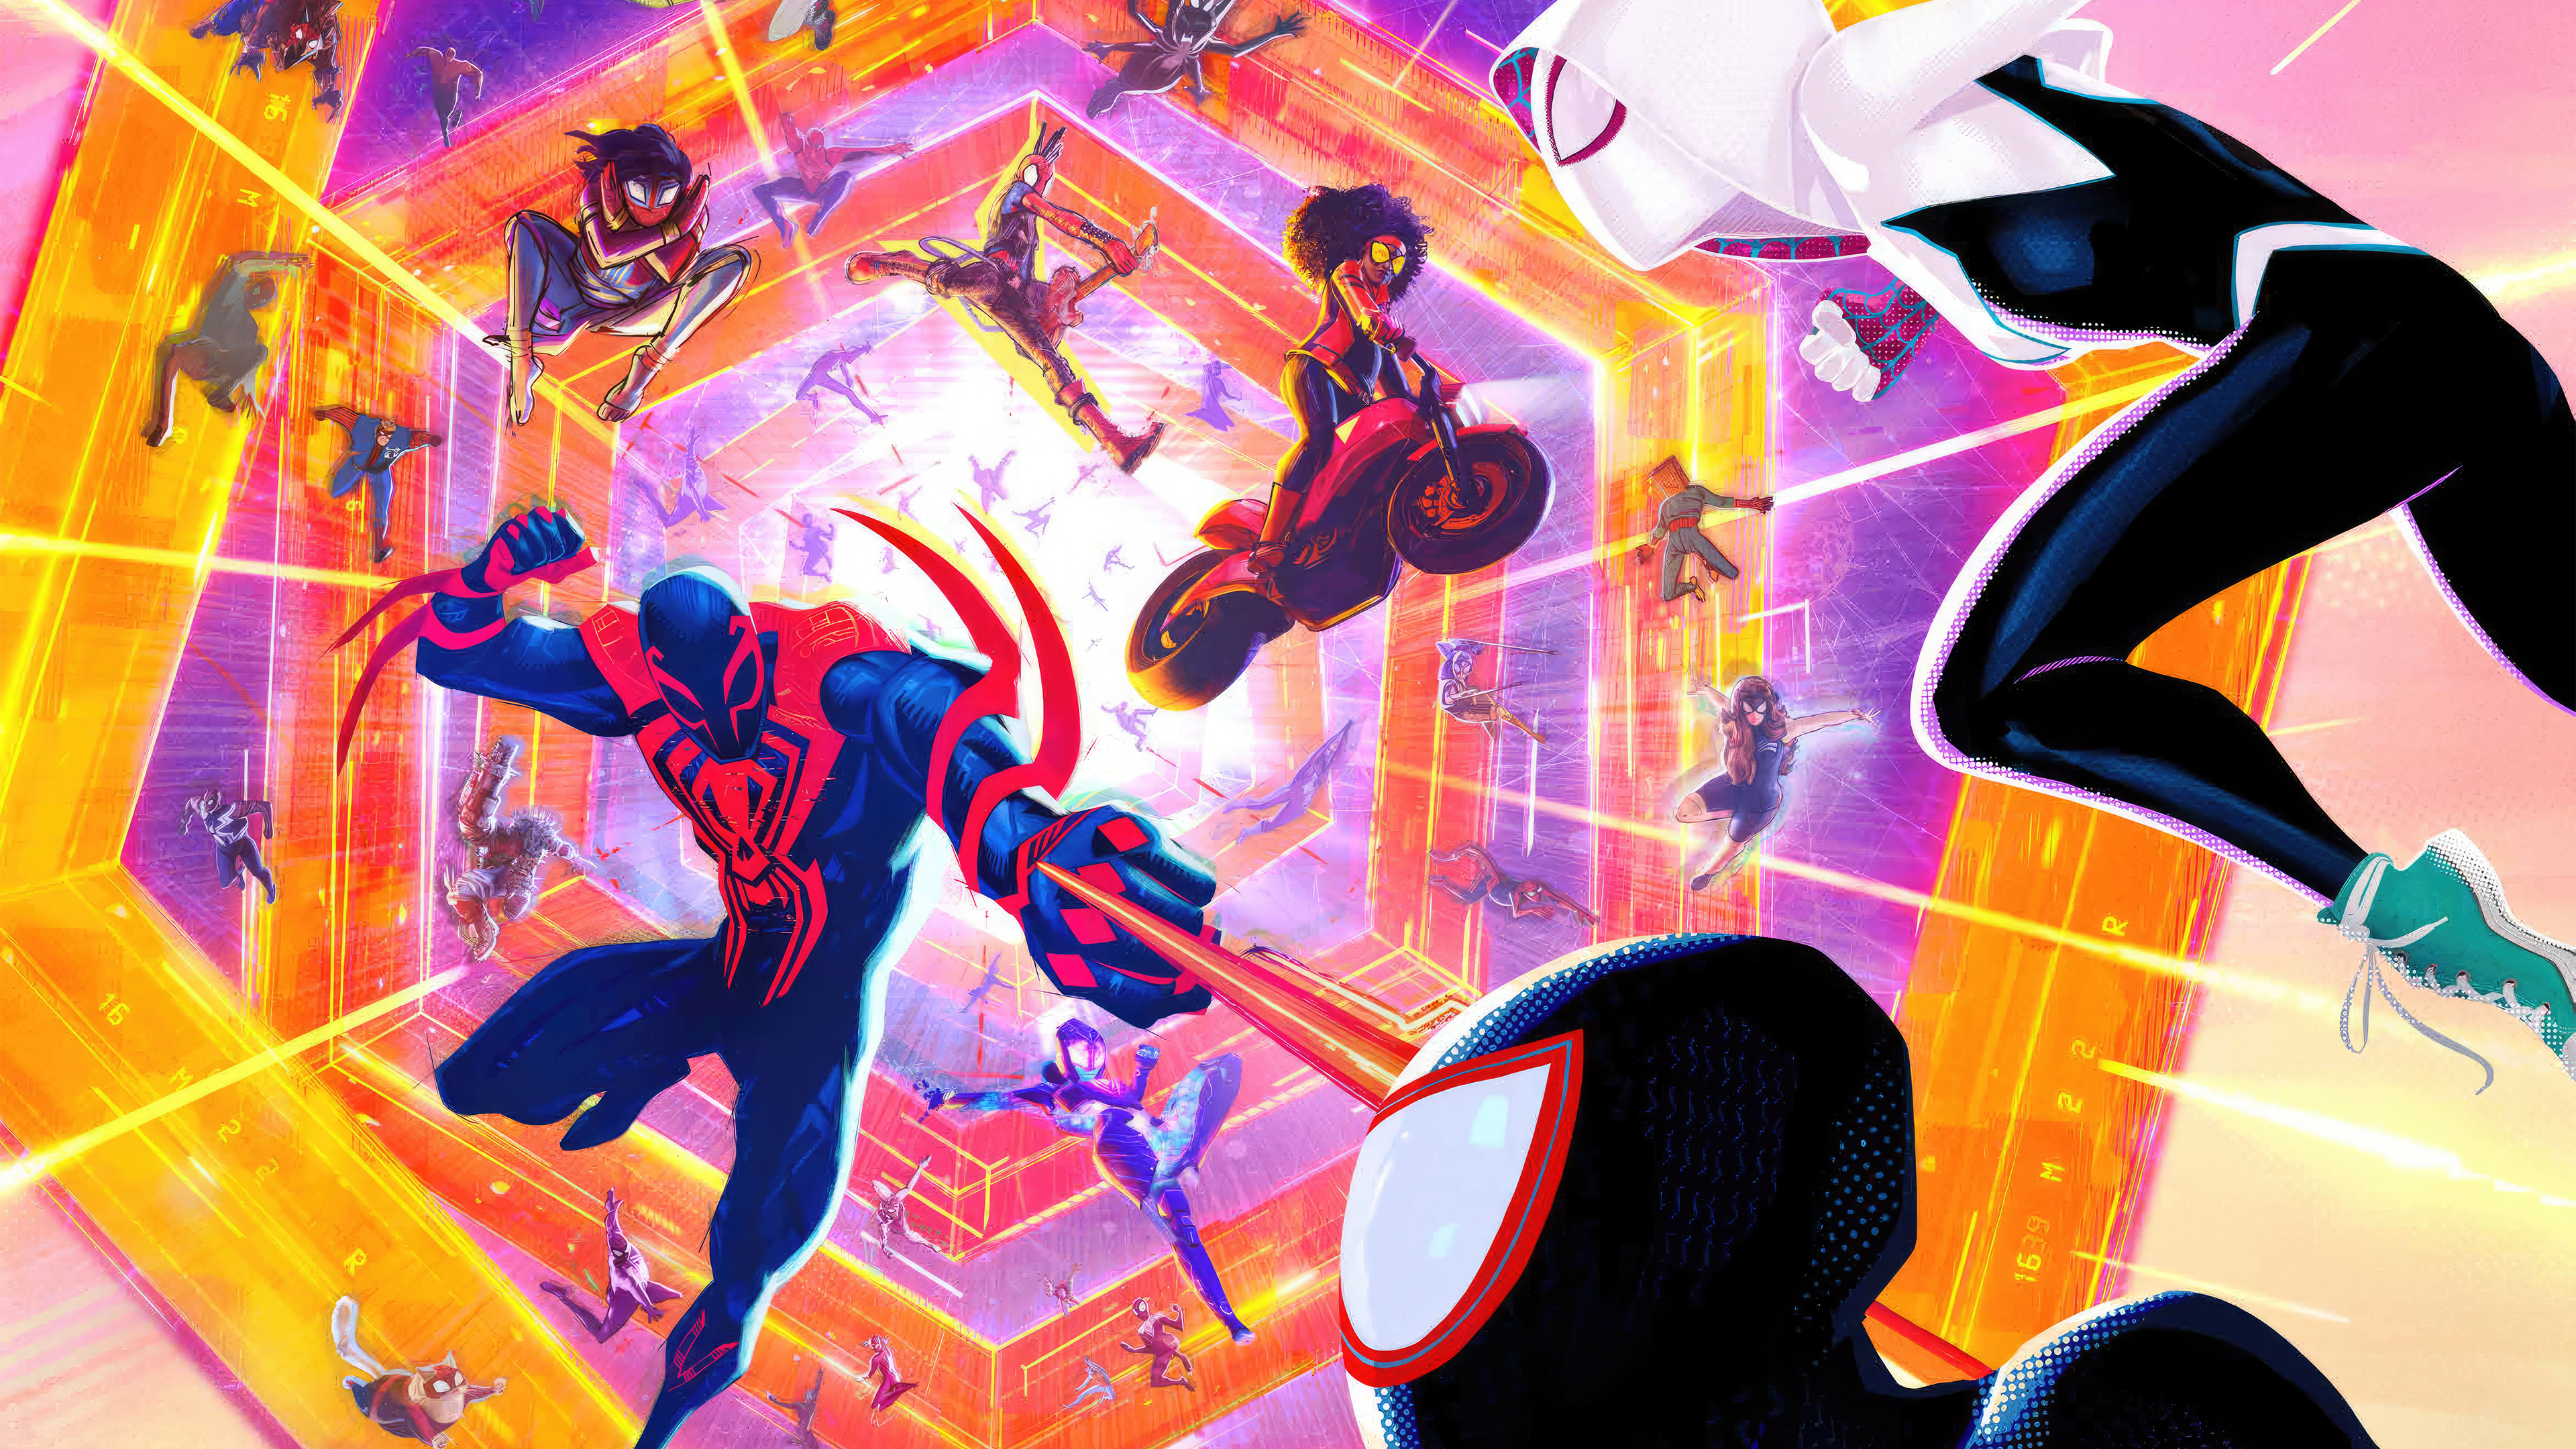 SpiderMan Across The Spider Verse 4k Wallpaper, HD Movies Wallpaper, 4k Wallpaper, Image, Background, Photos and Picture